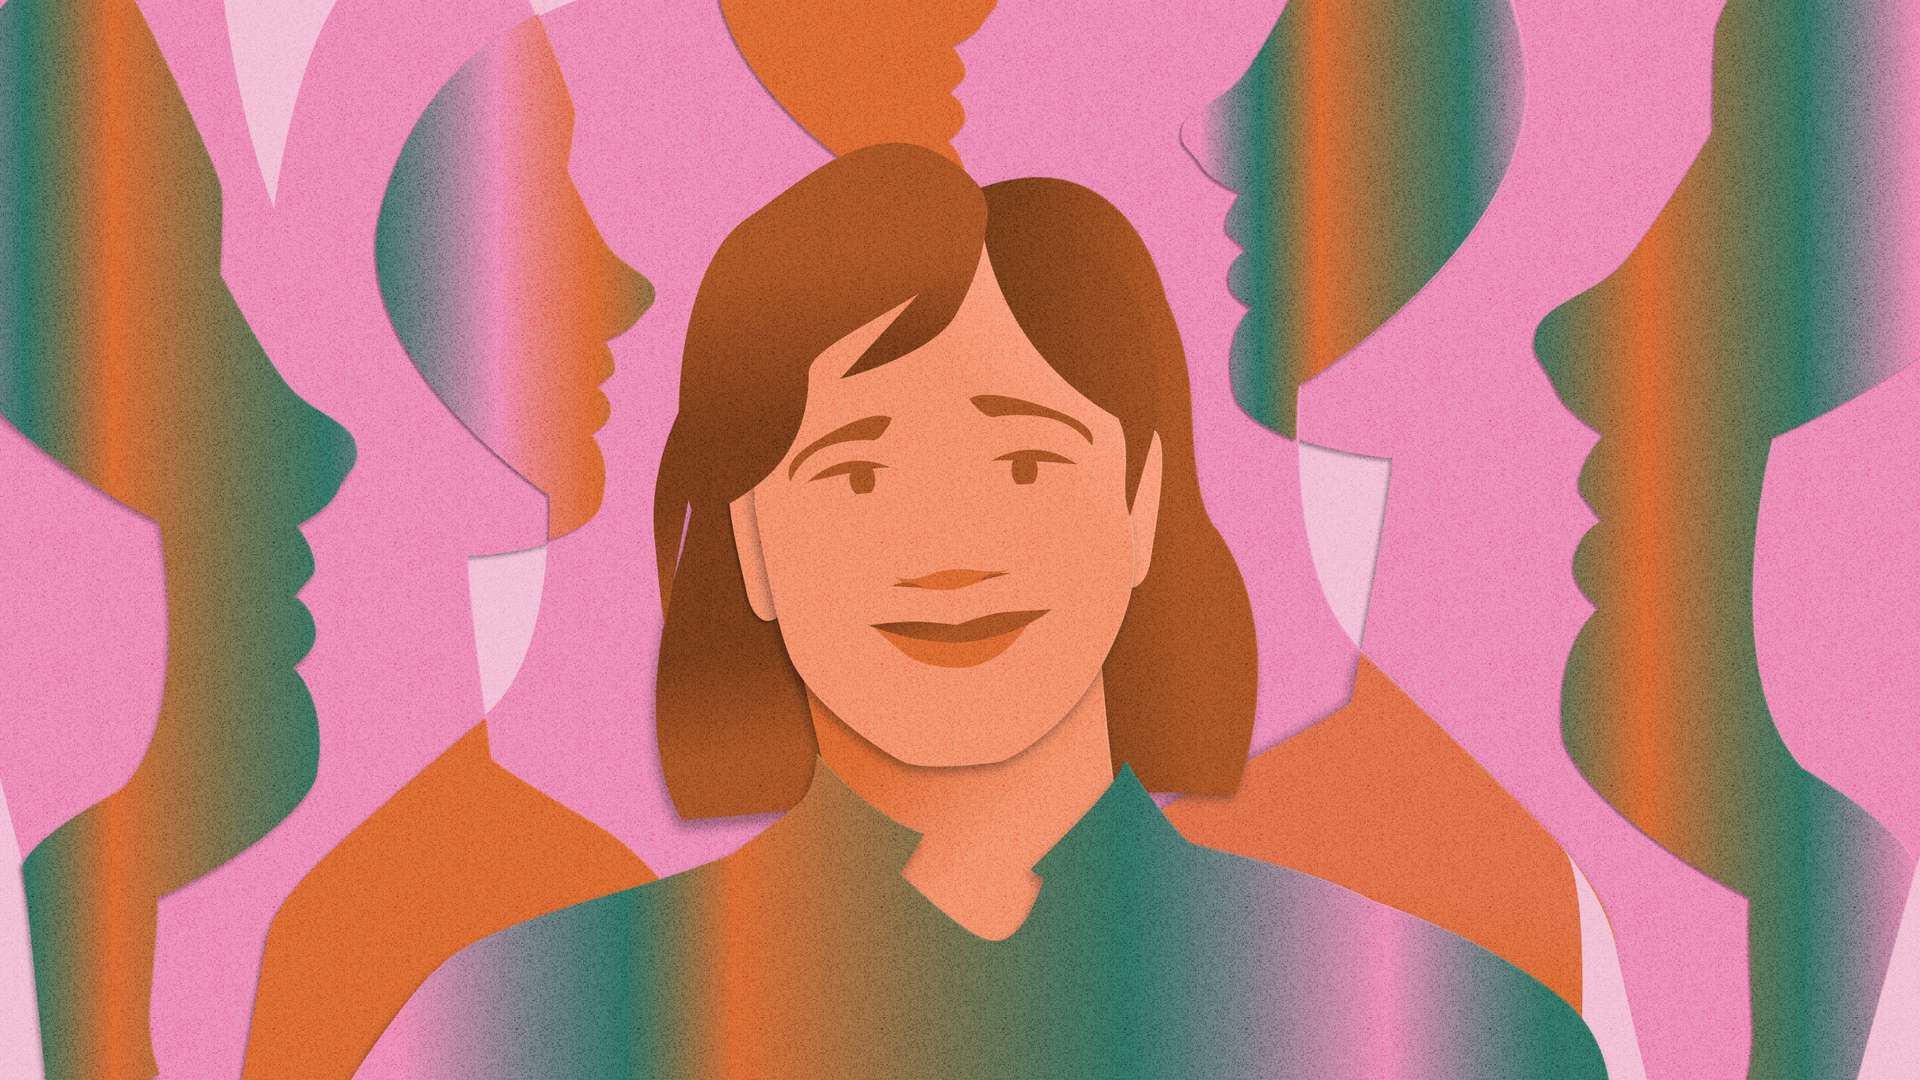 A person with brown hair smiles at the viewer against a background of multicolored silhouettes of faces